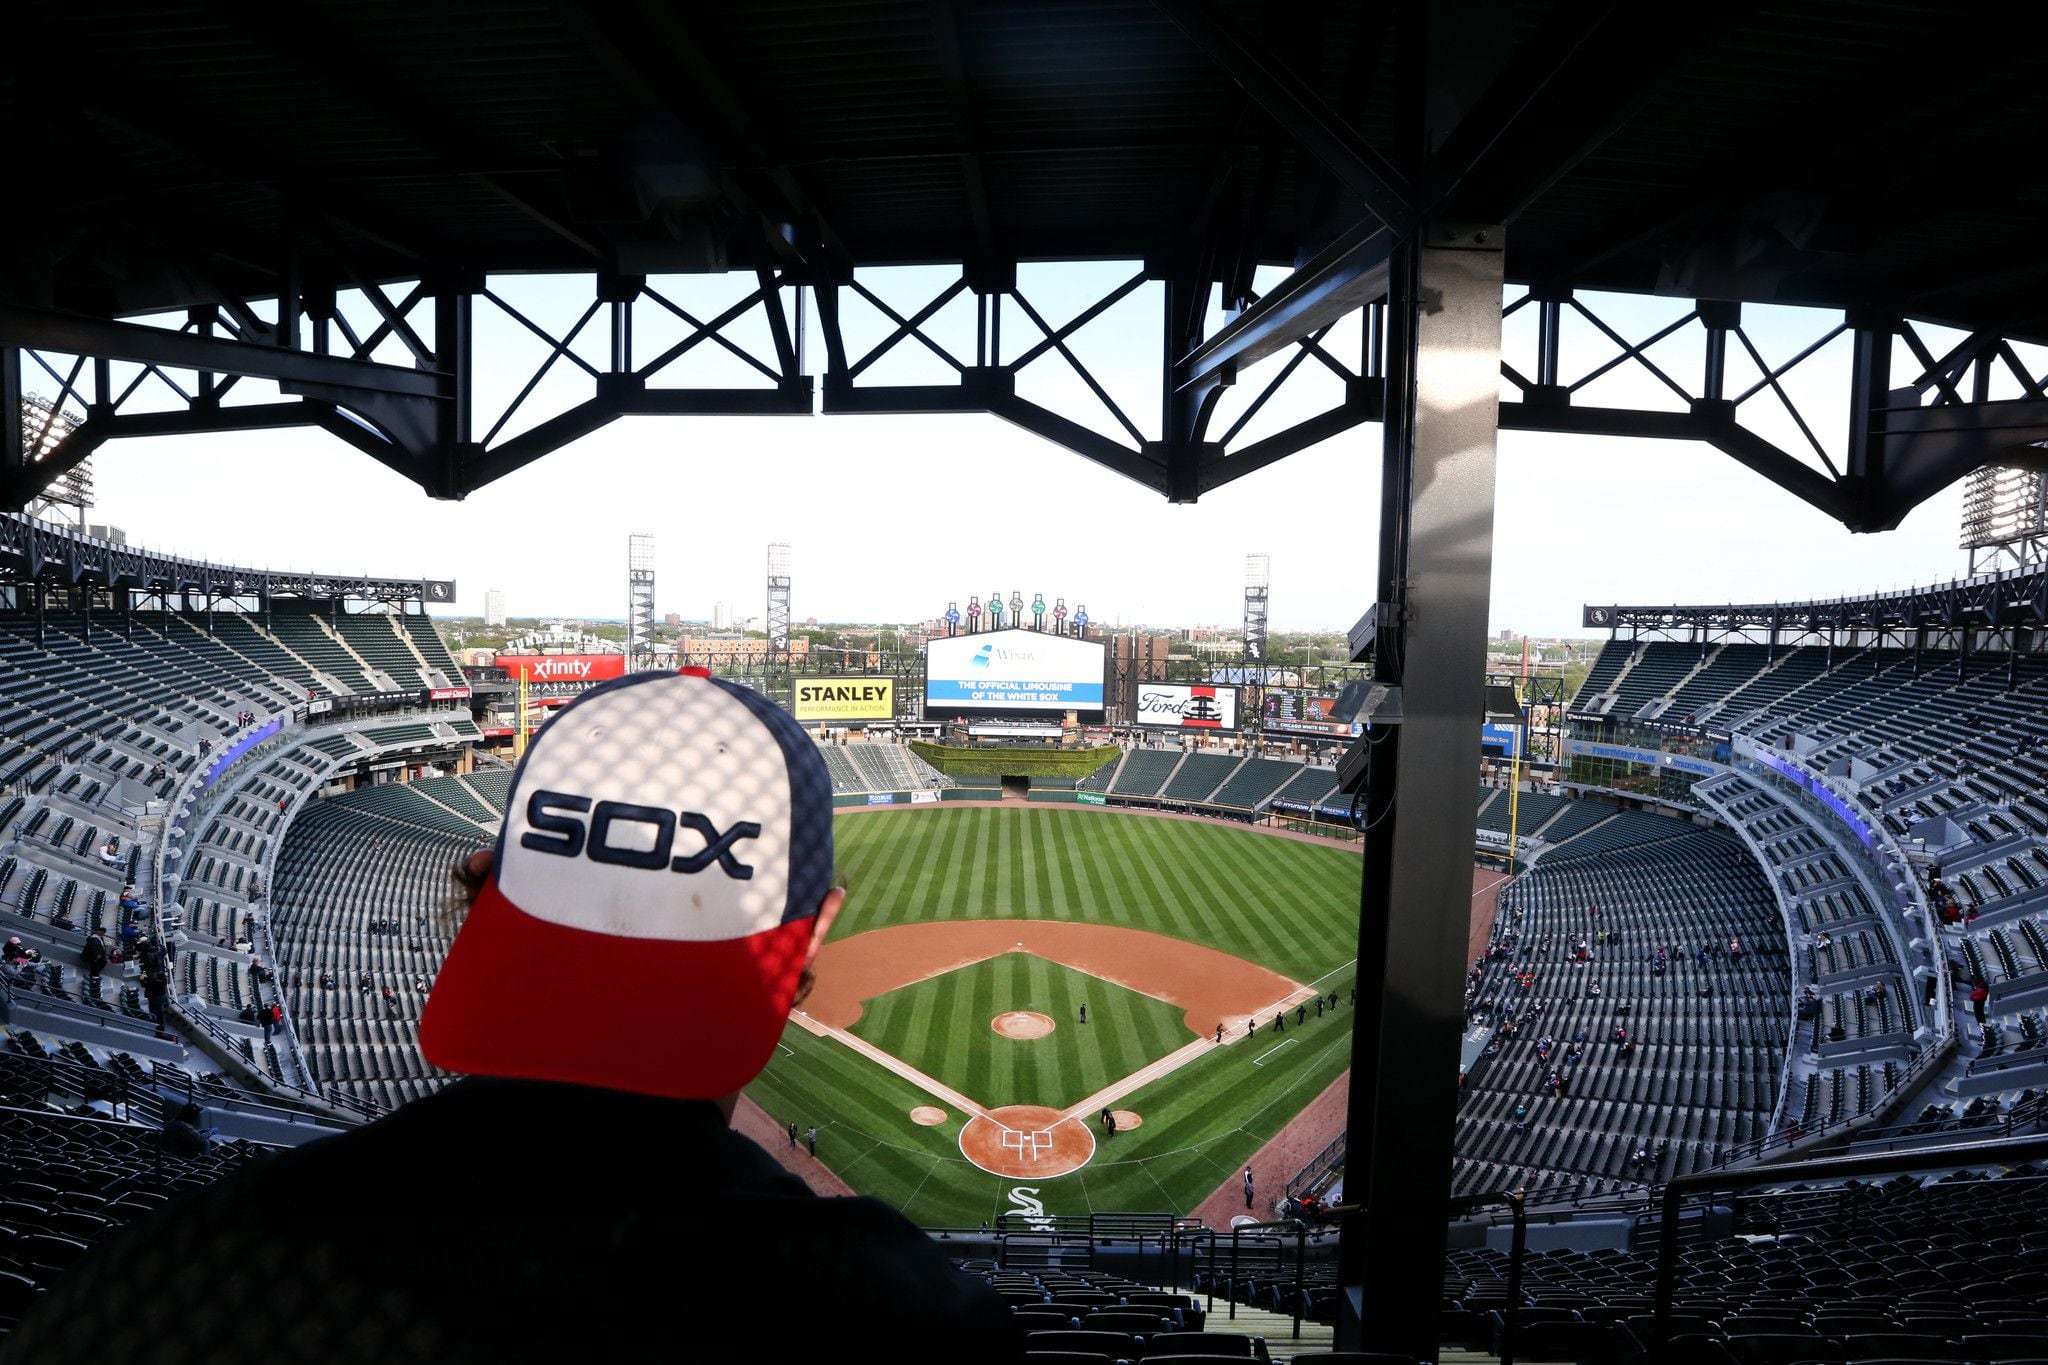 south loop alderman throws support behind new white sox stadium after developer meeting